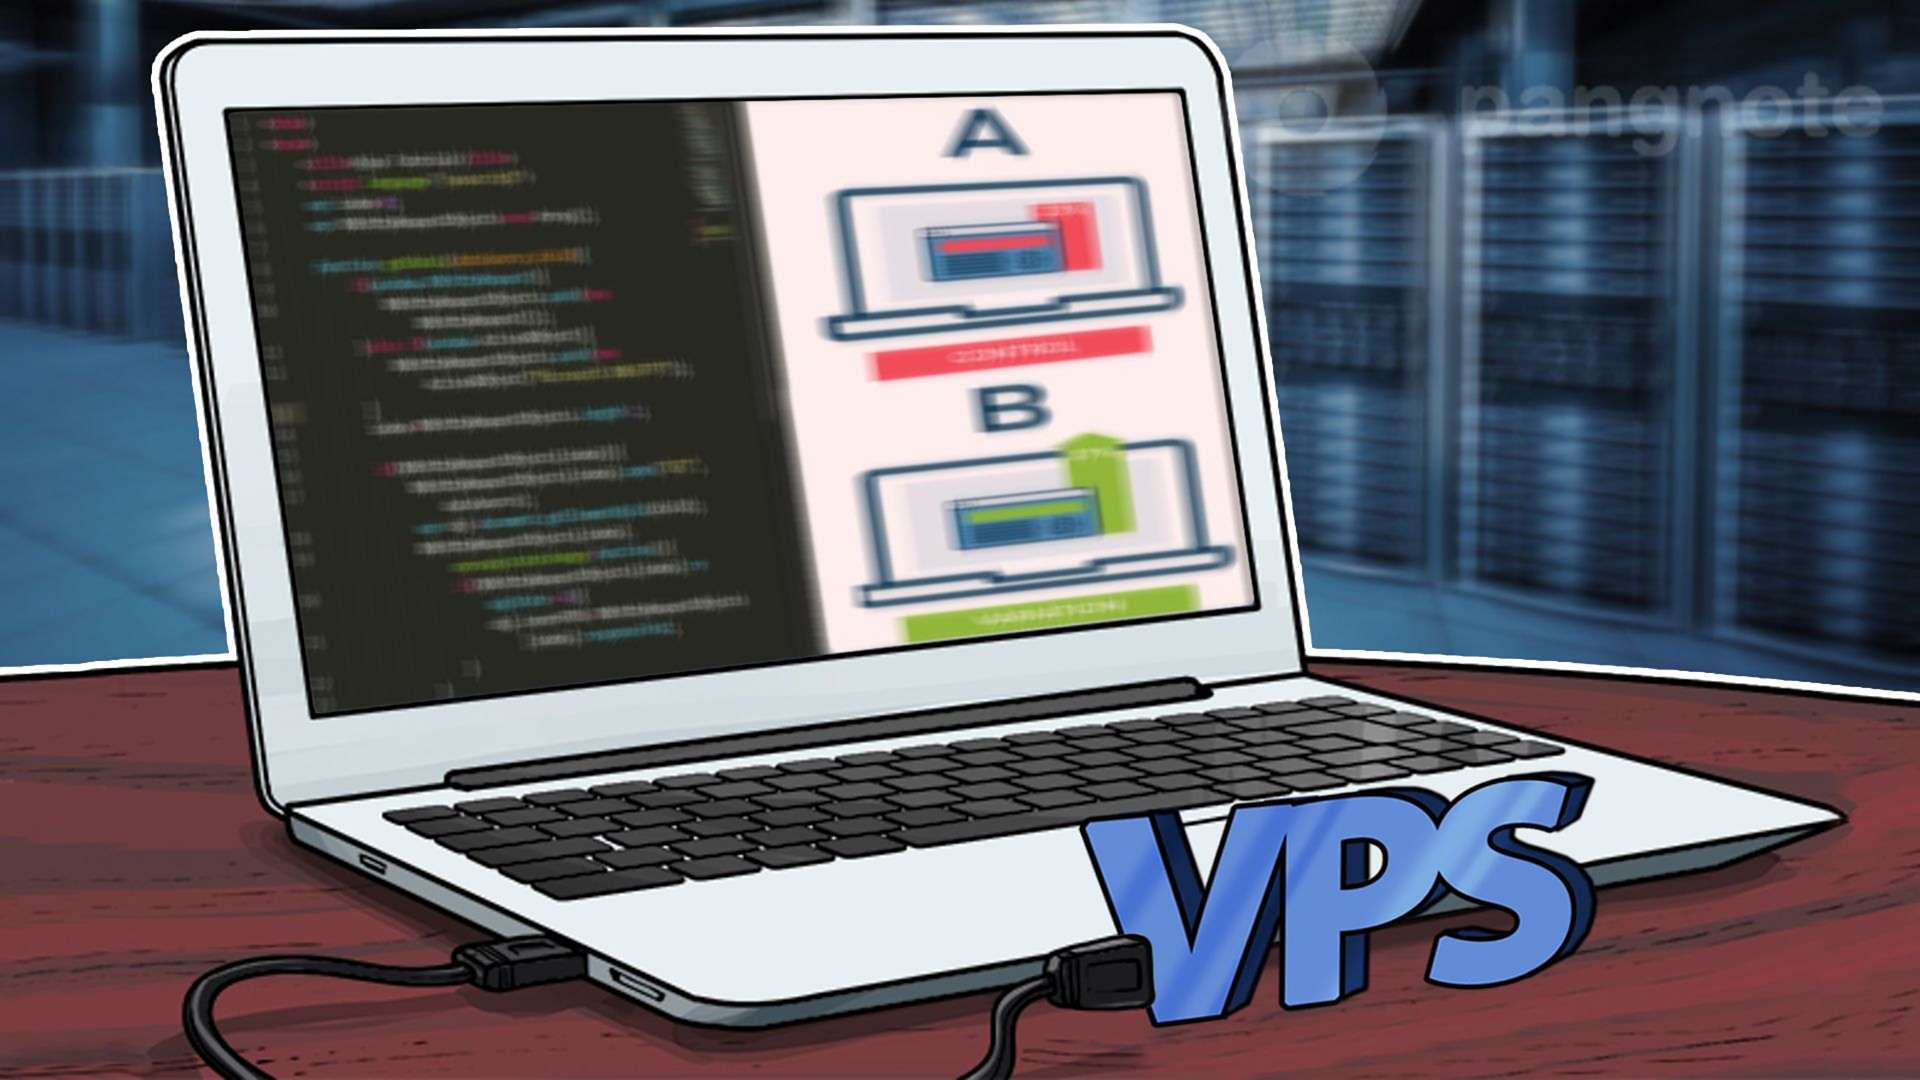 VPS server uses for development and testing